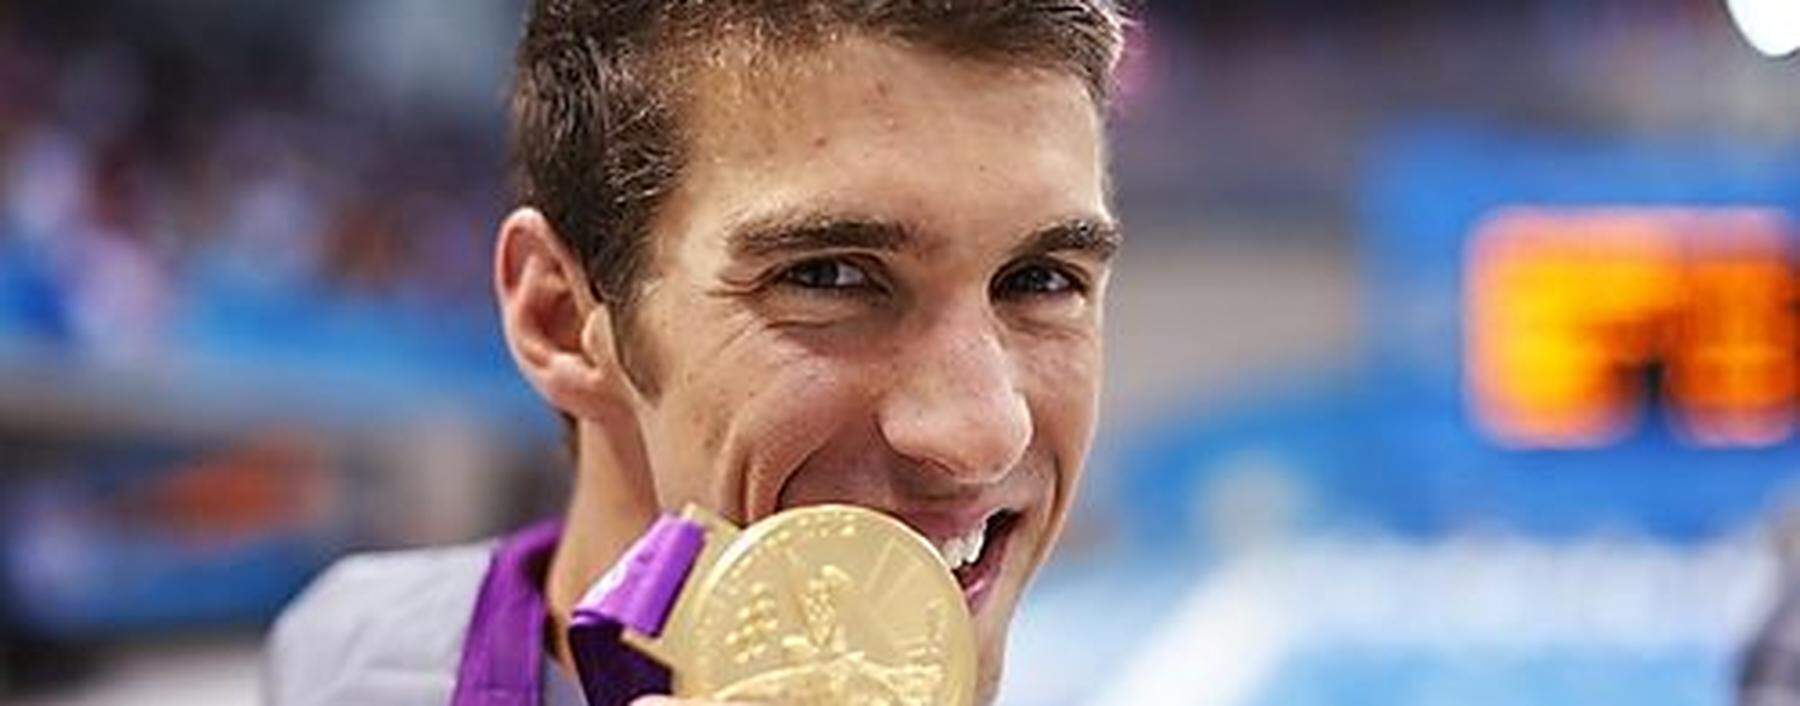 Michael Phelps of the U.S. poses with his gold medal after winning the men's 4x100m medley relay final during the London 2012 Olympic Games at the Aquatics Centre